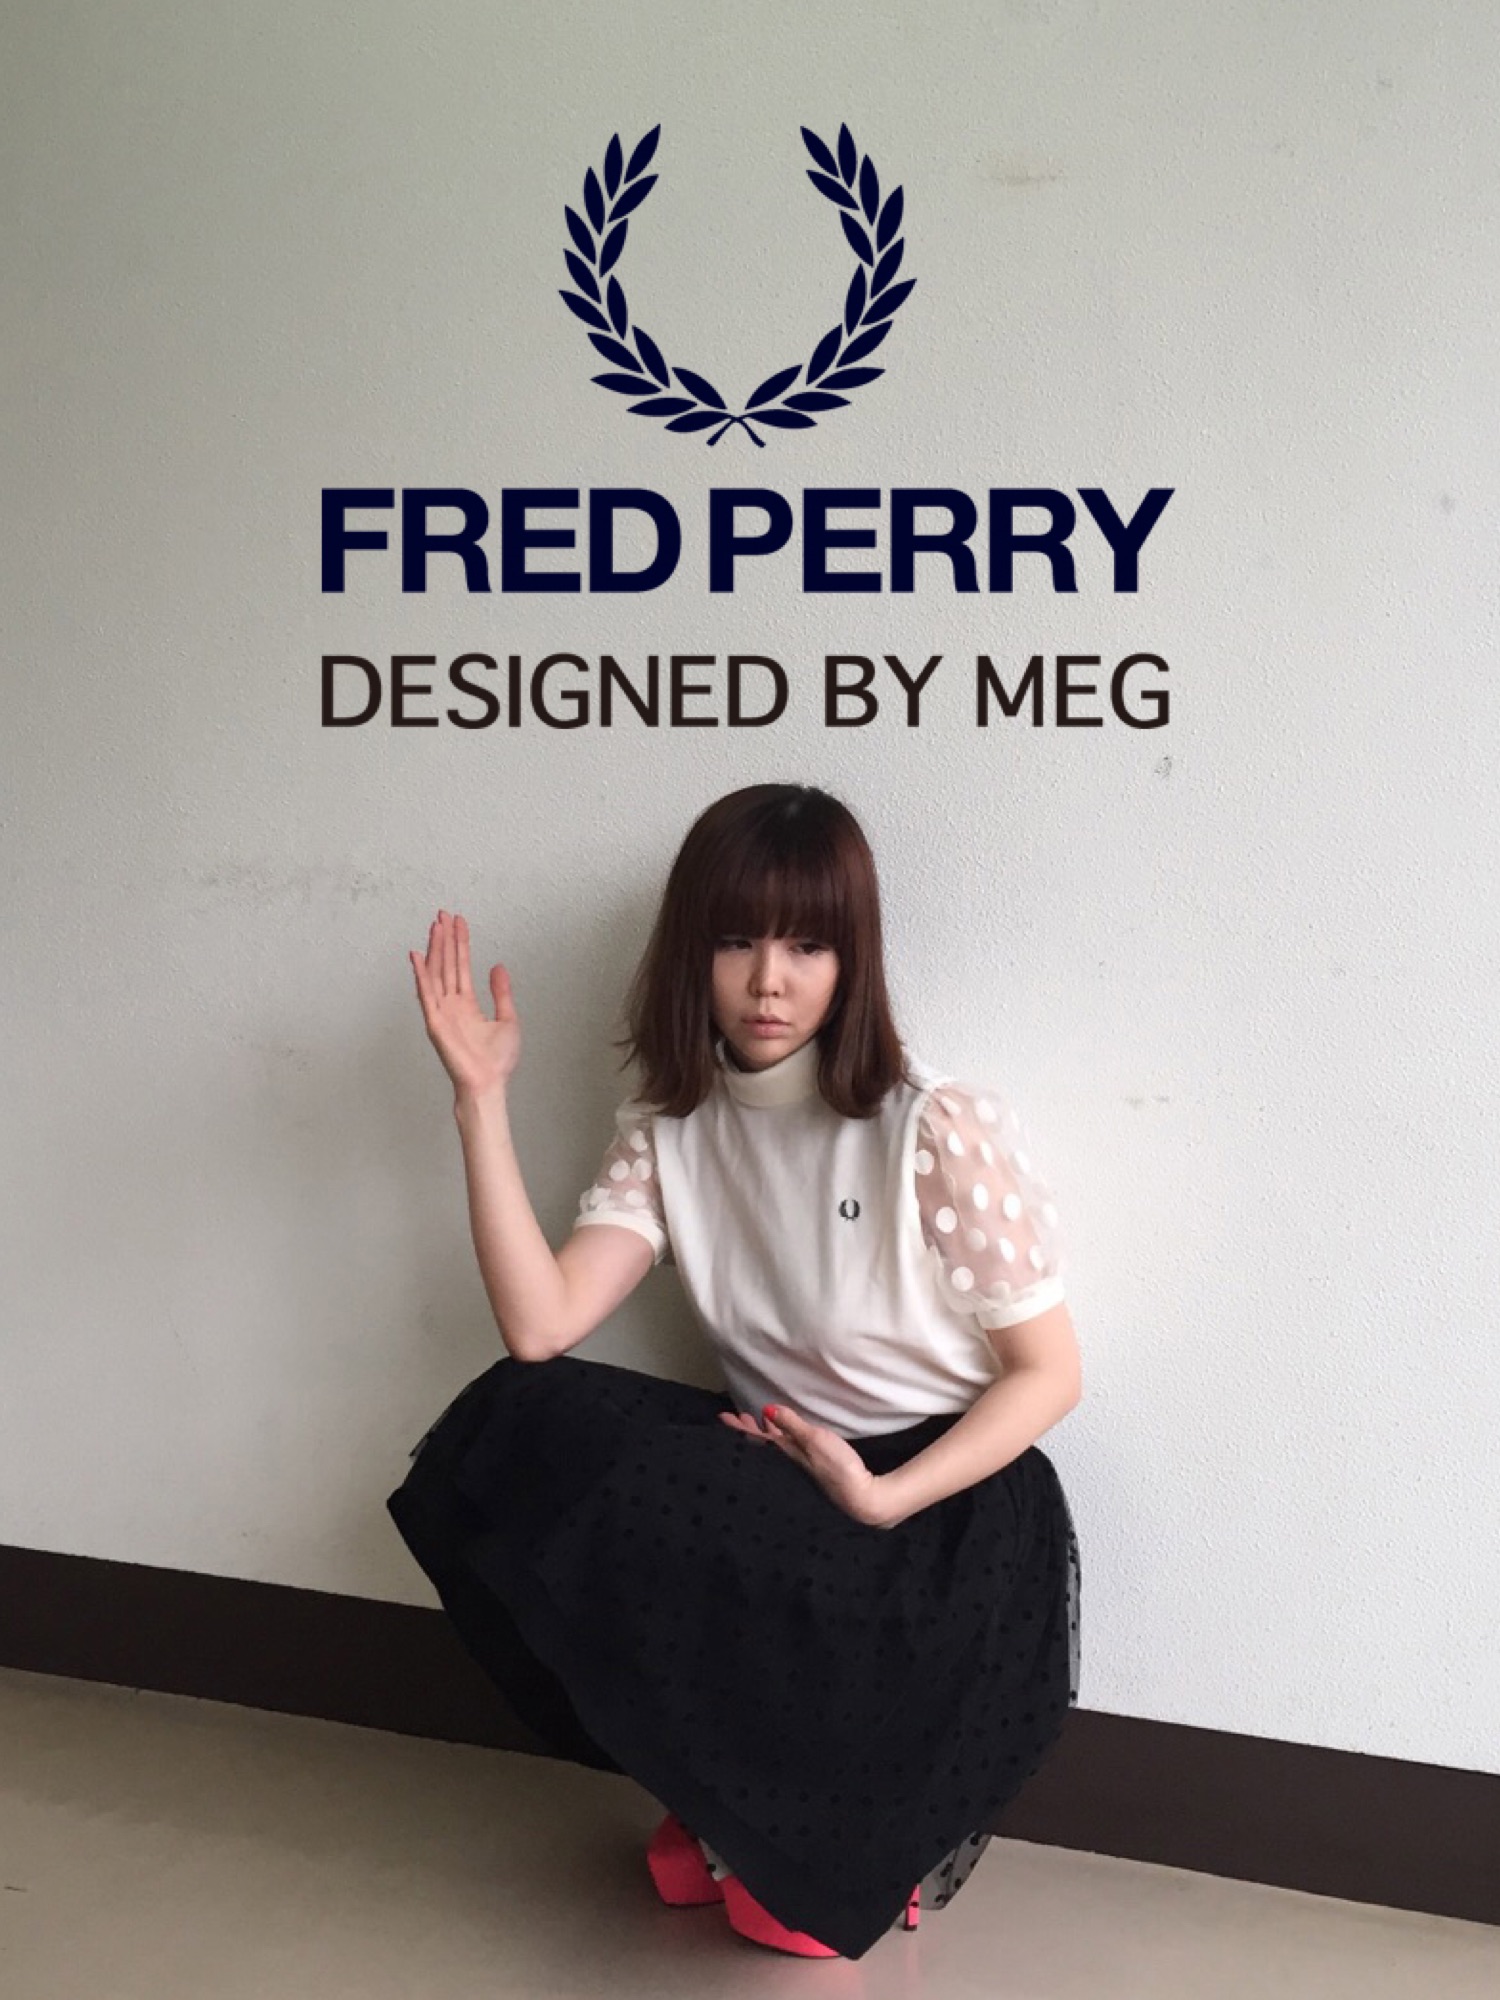 FRED PERRY（フレッドペリー）の「FRED PERRY DESIGNED